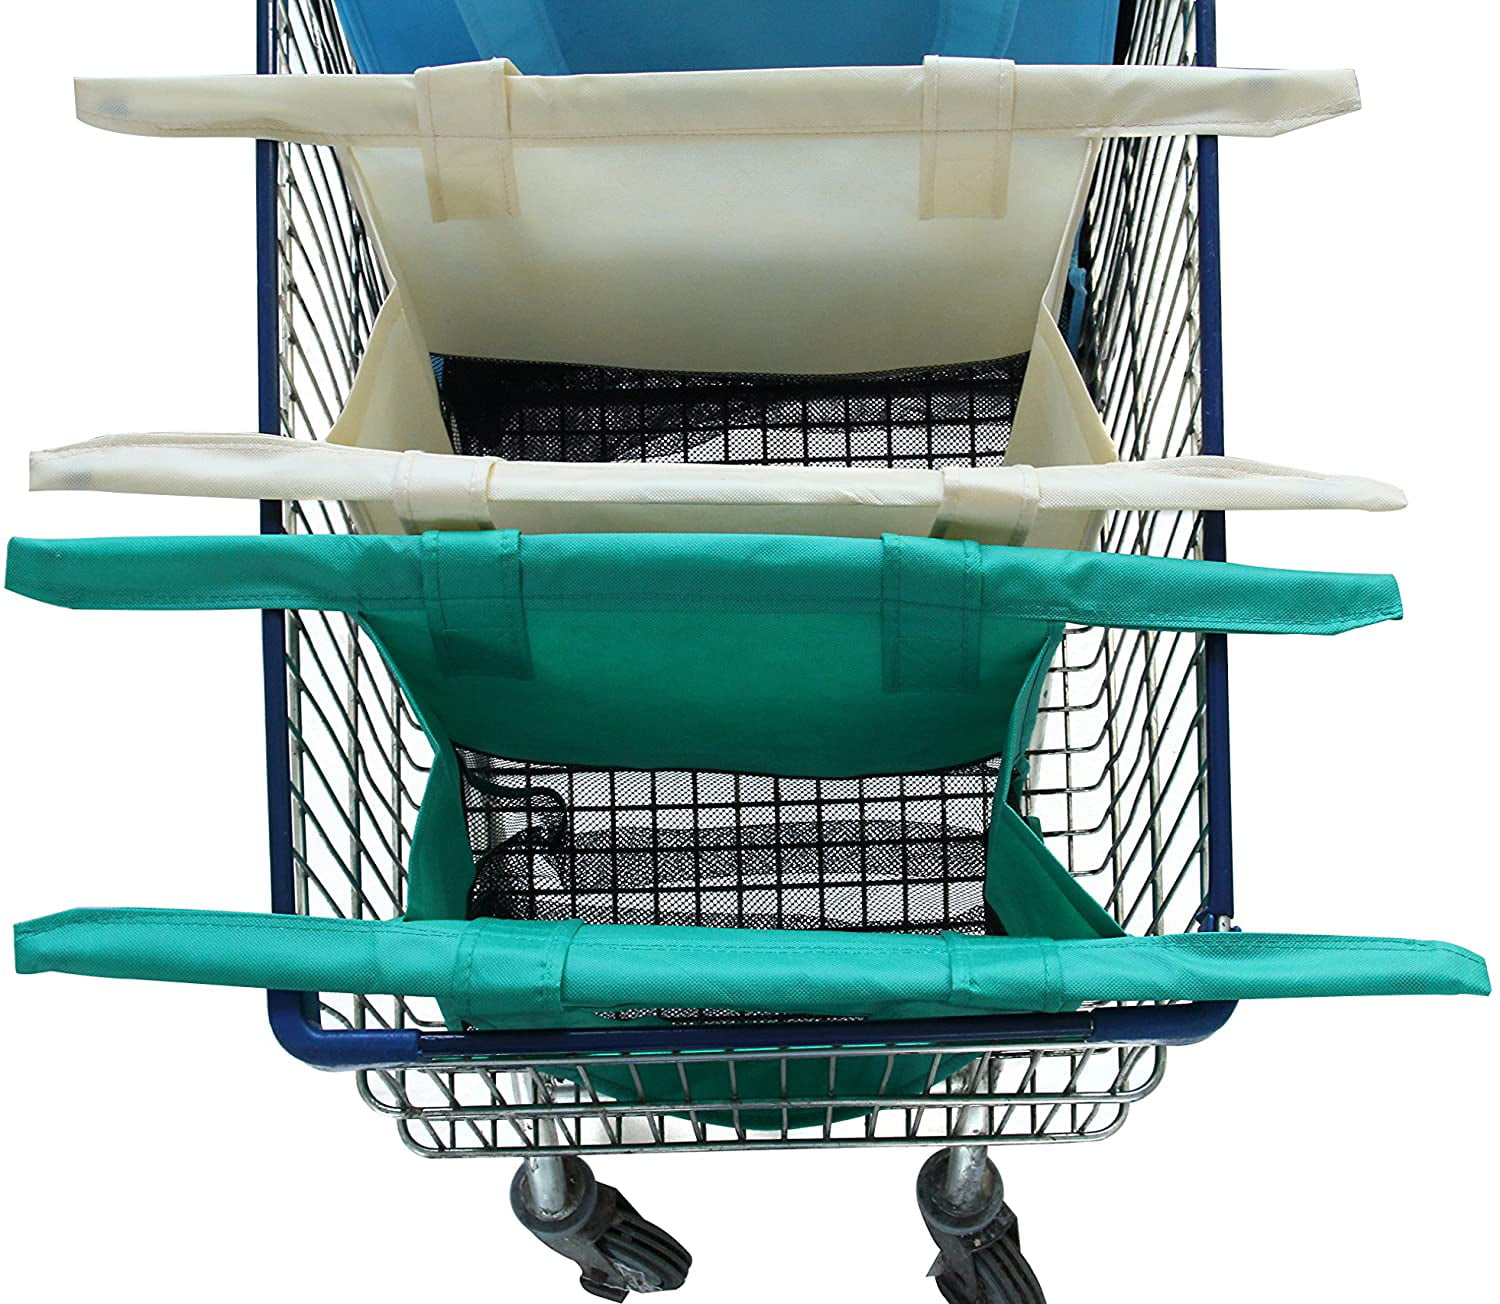 Reusable Shopping Cart Bags and Grocery Organizer Designed for 